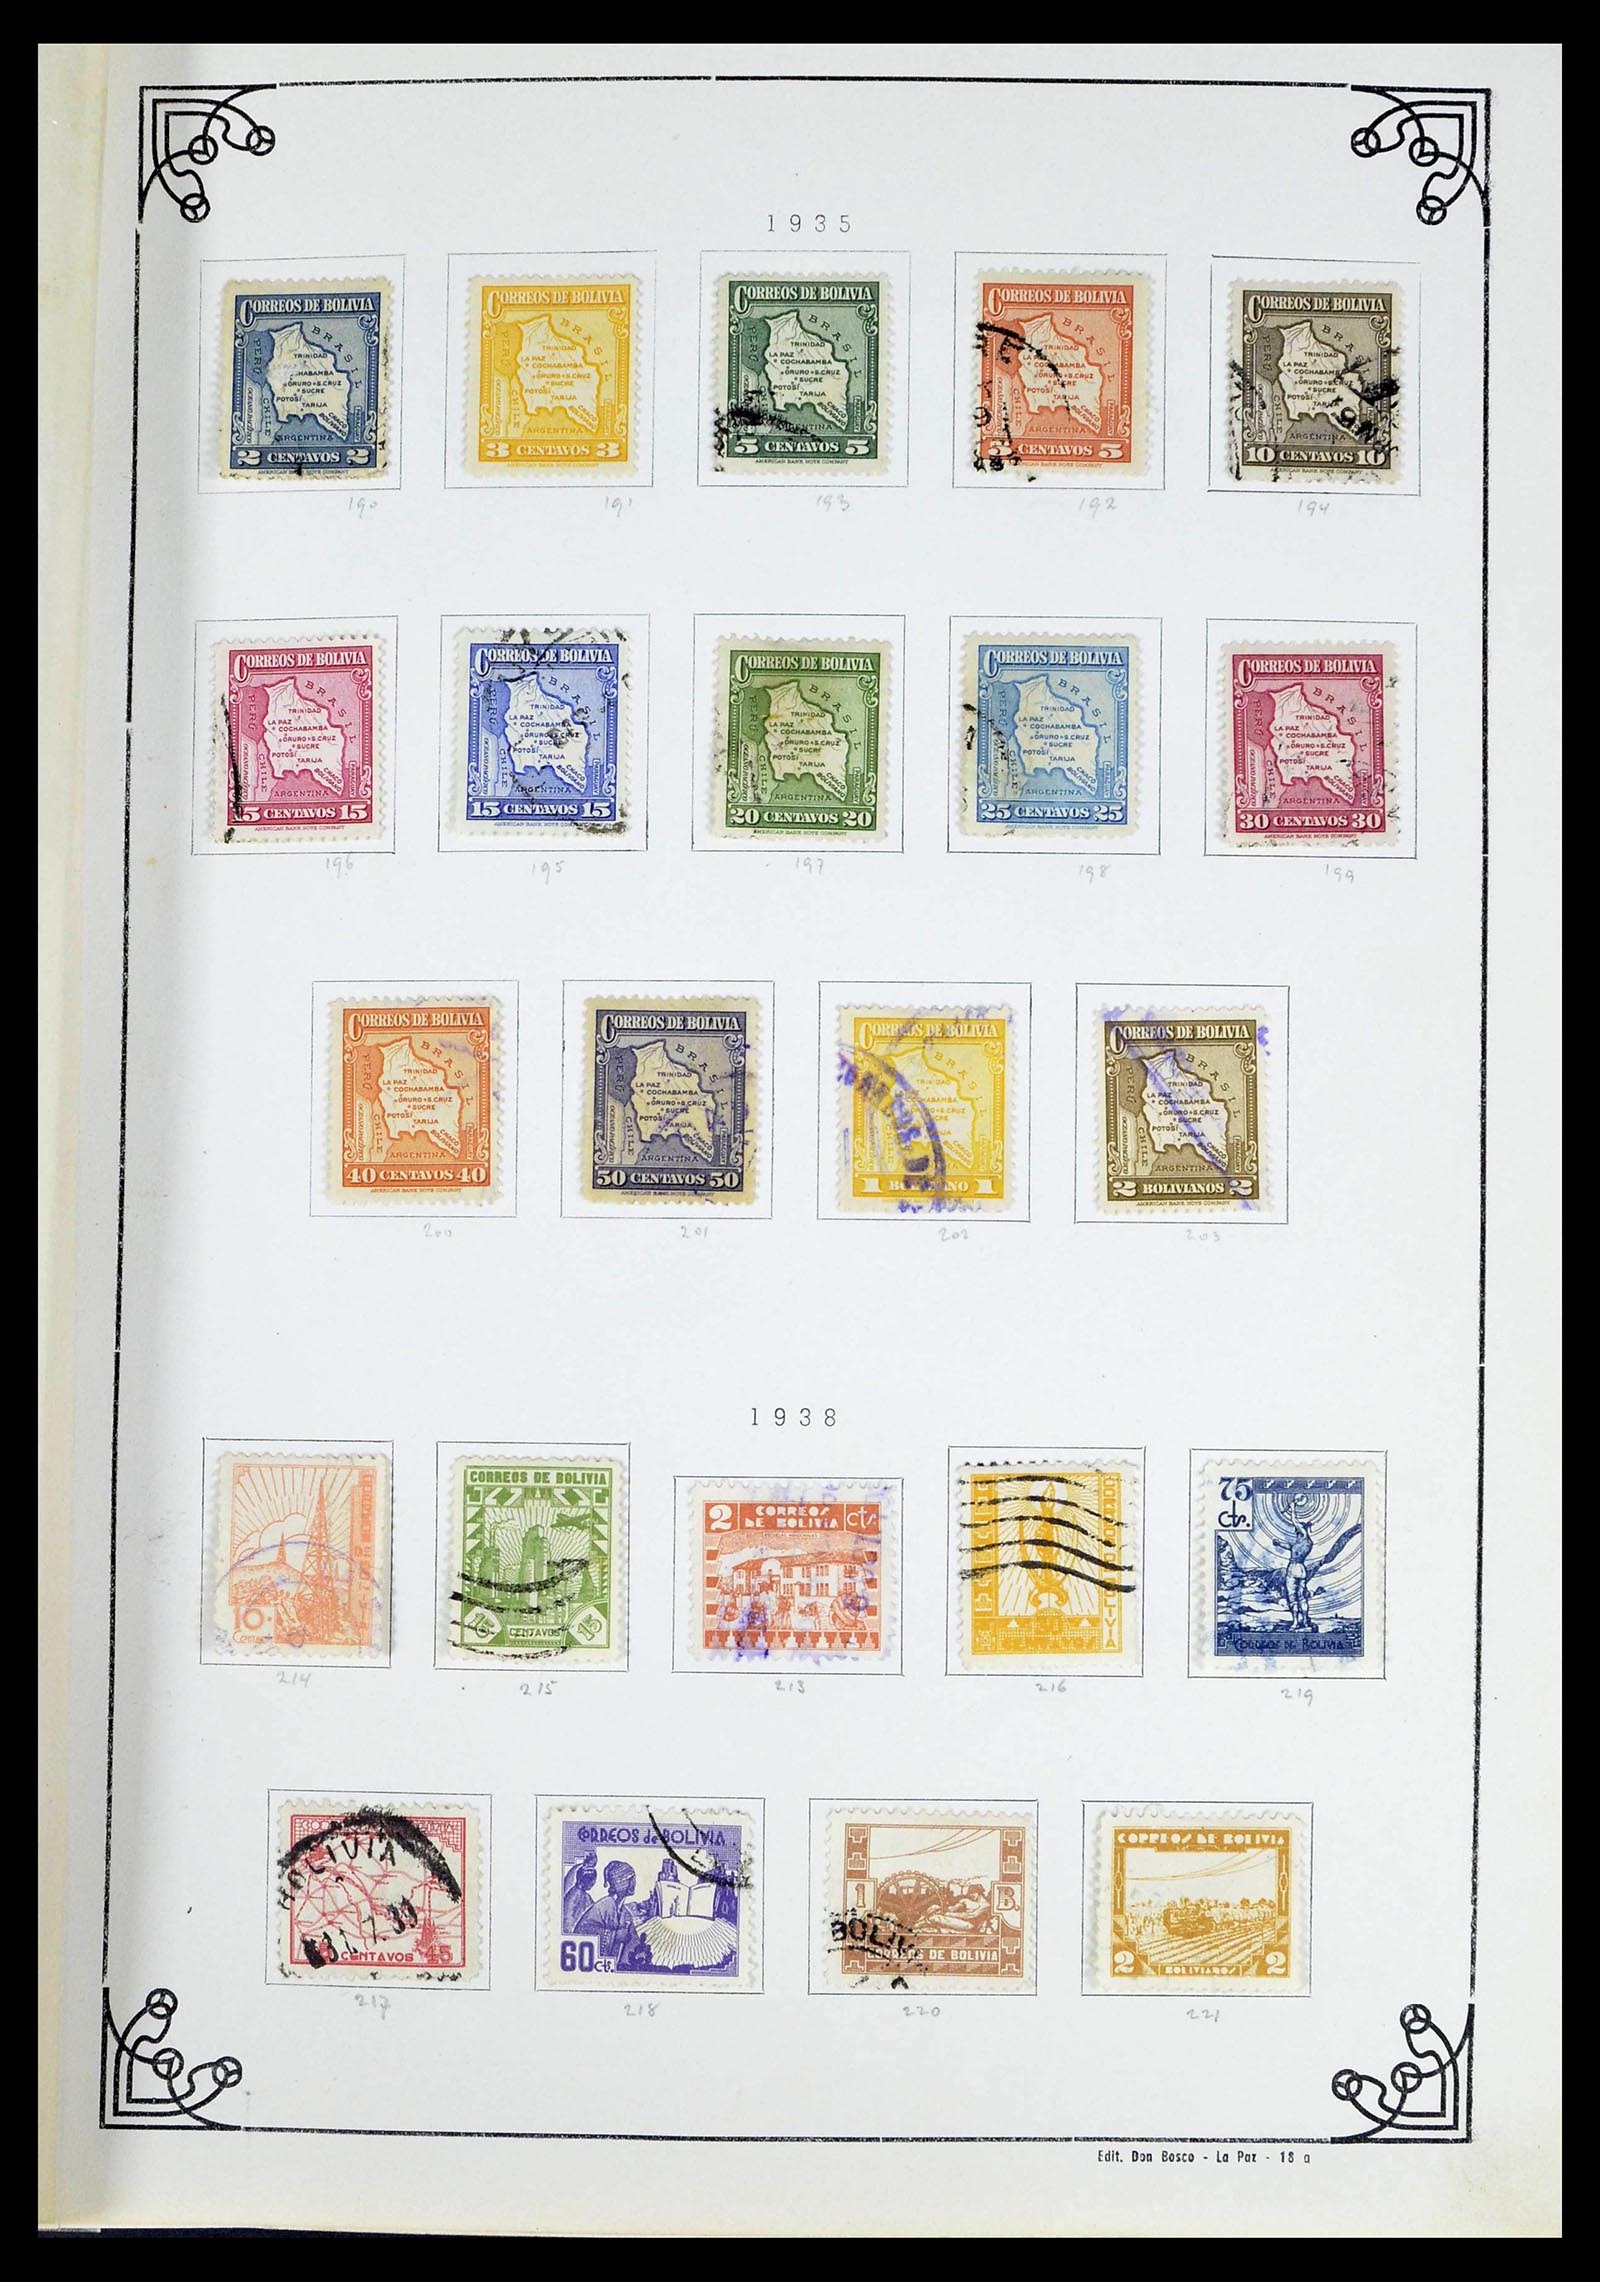 39224 0025 - Stamp collection 39224 Bolivia 1849-1955.